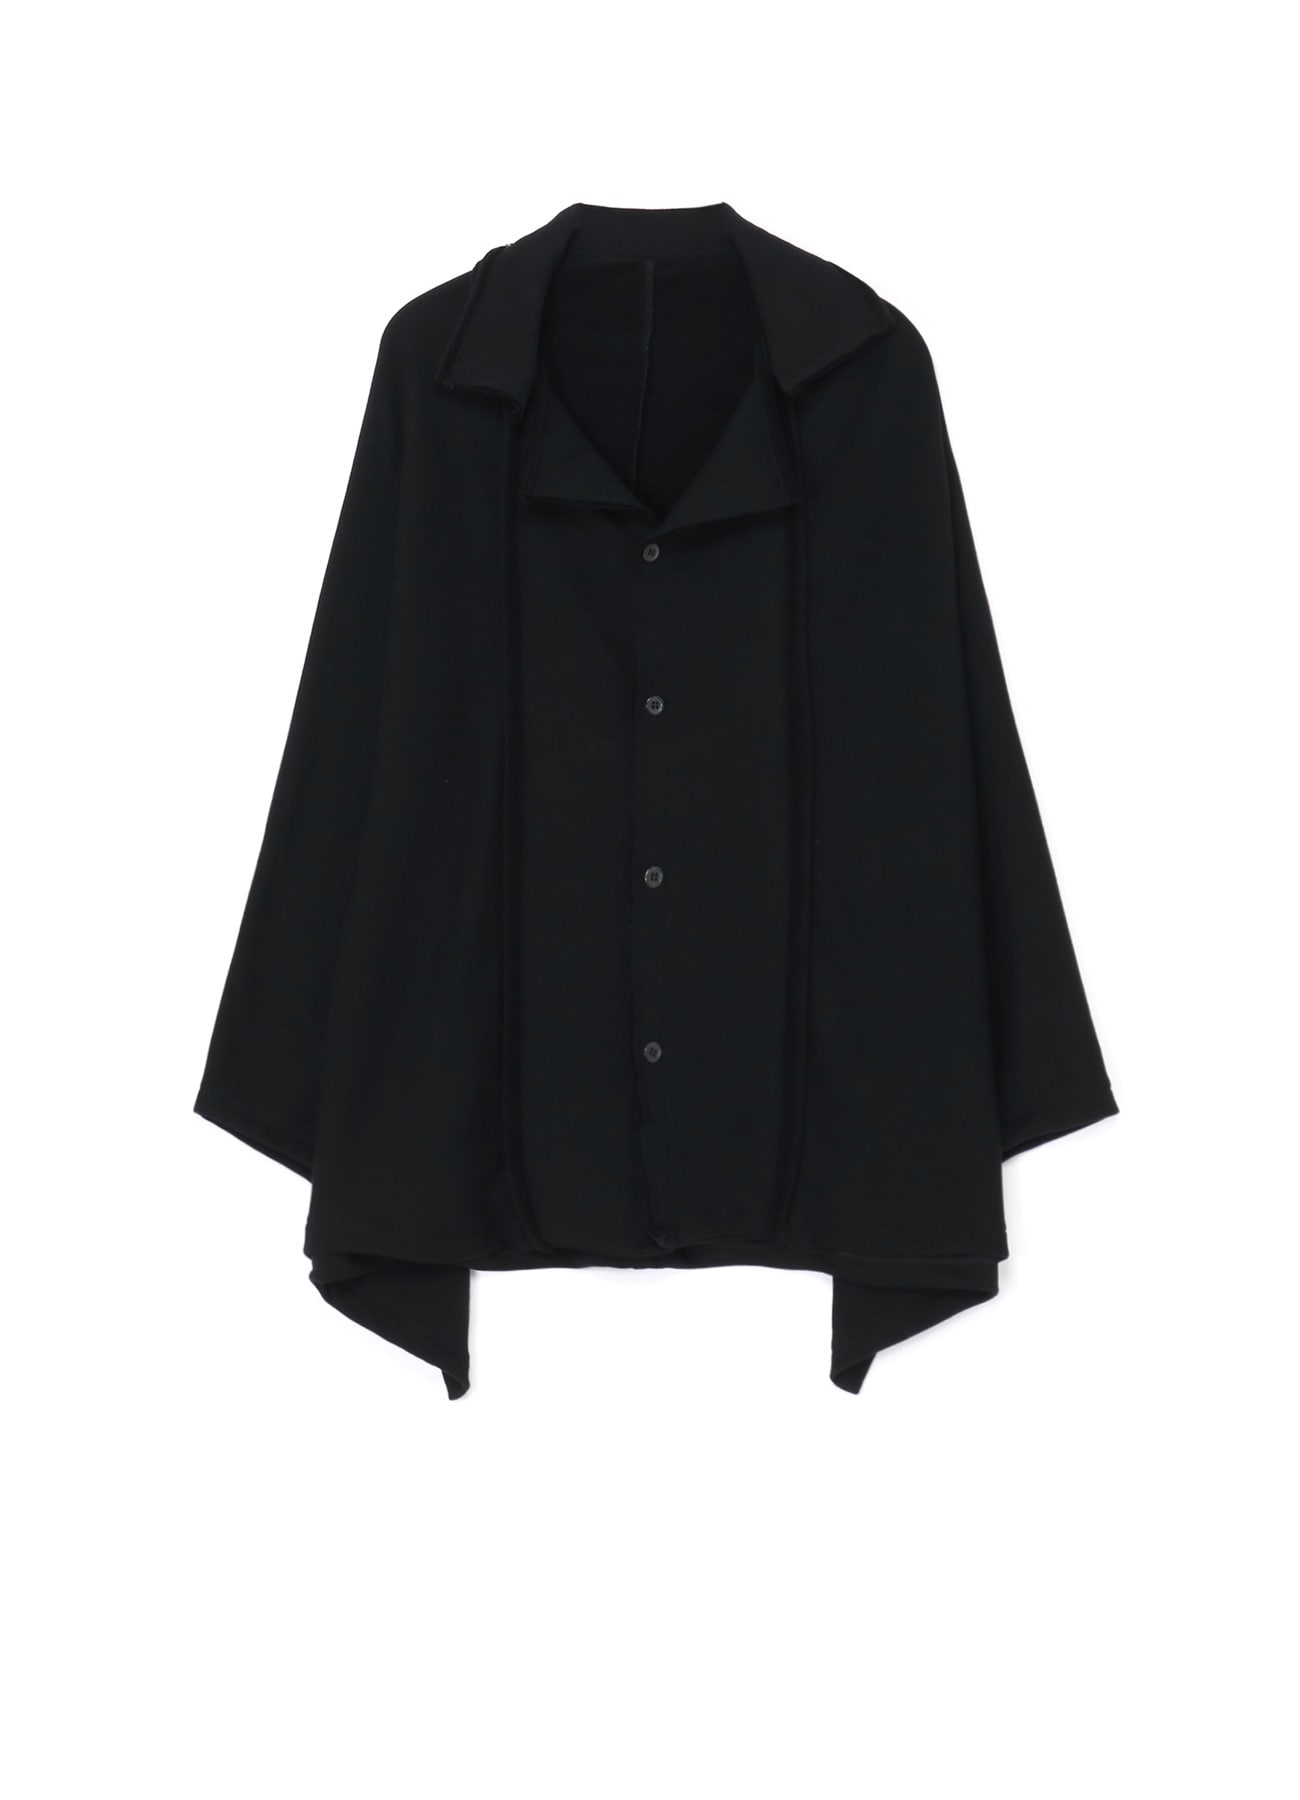 FRENCH TERRY CLOTH PONCHO WITH BUTTON-UP CLOSURE